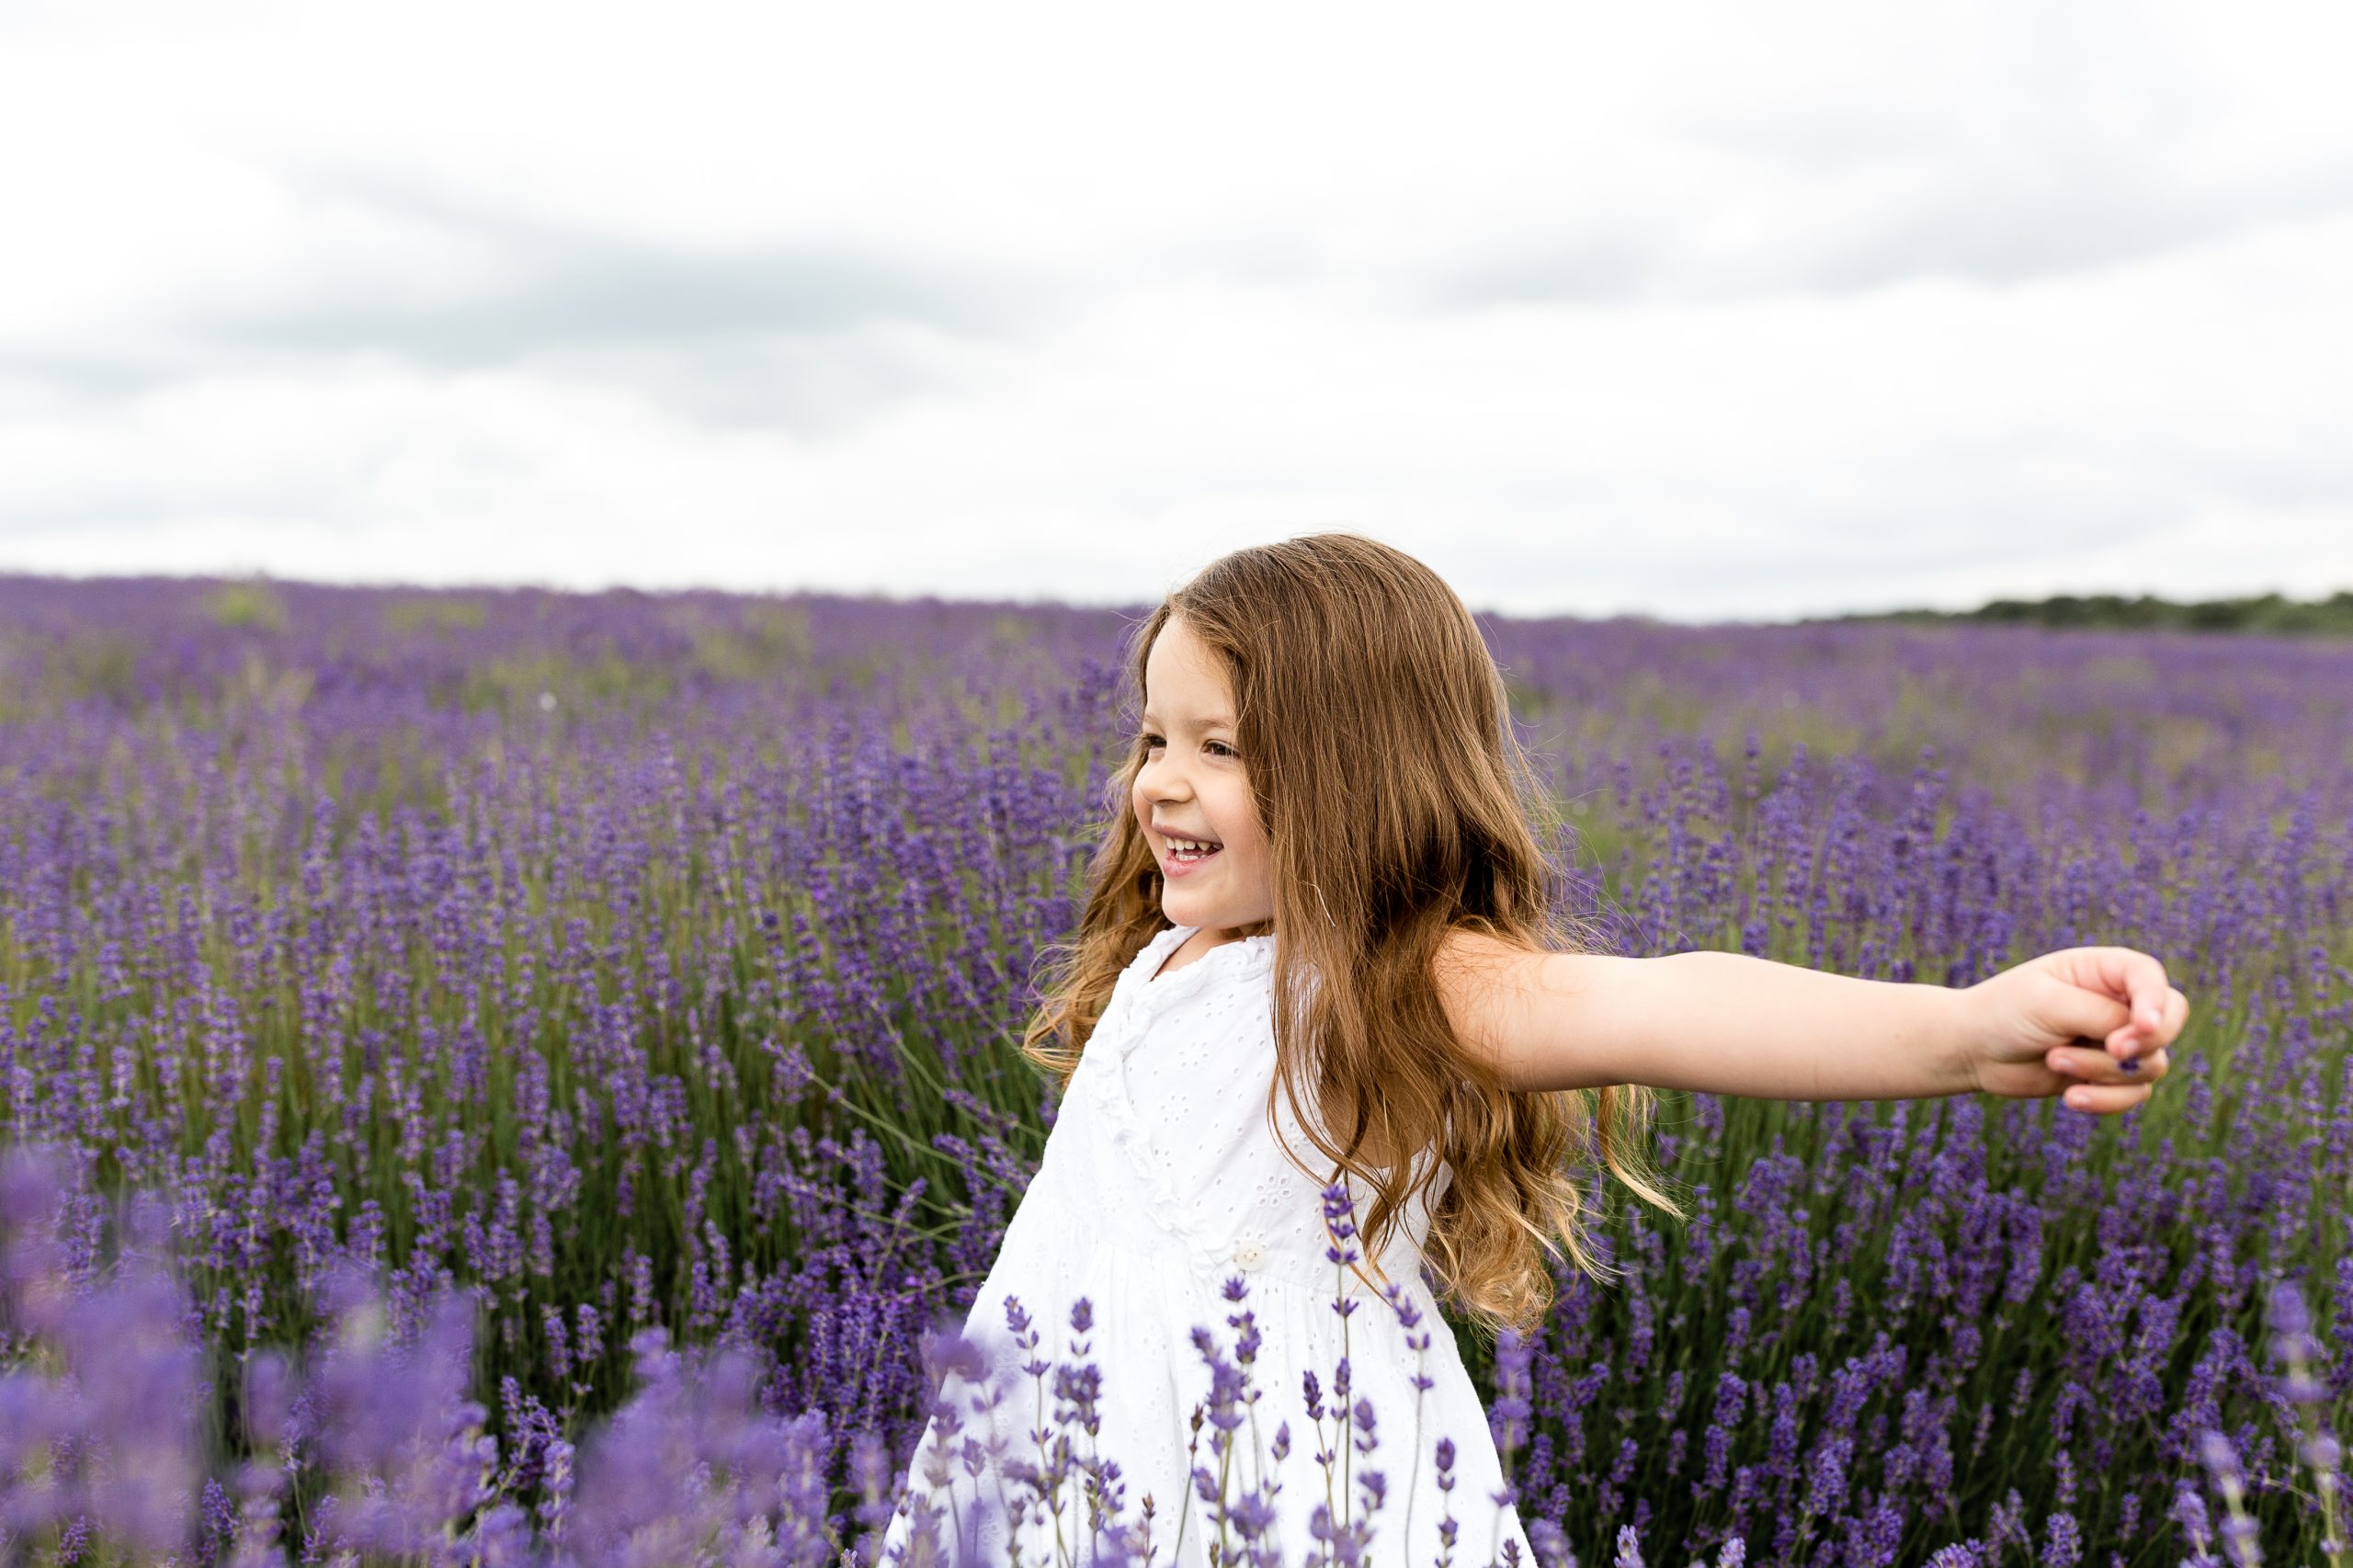 inspiration picture of a little girl having fun in a lavender field